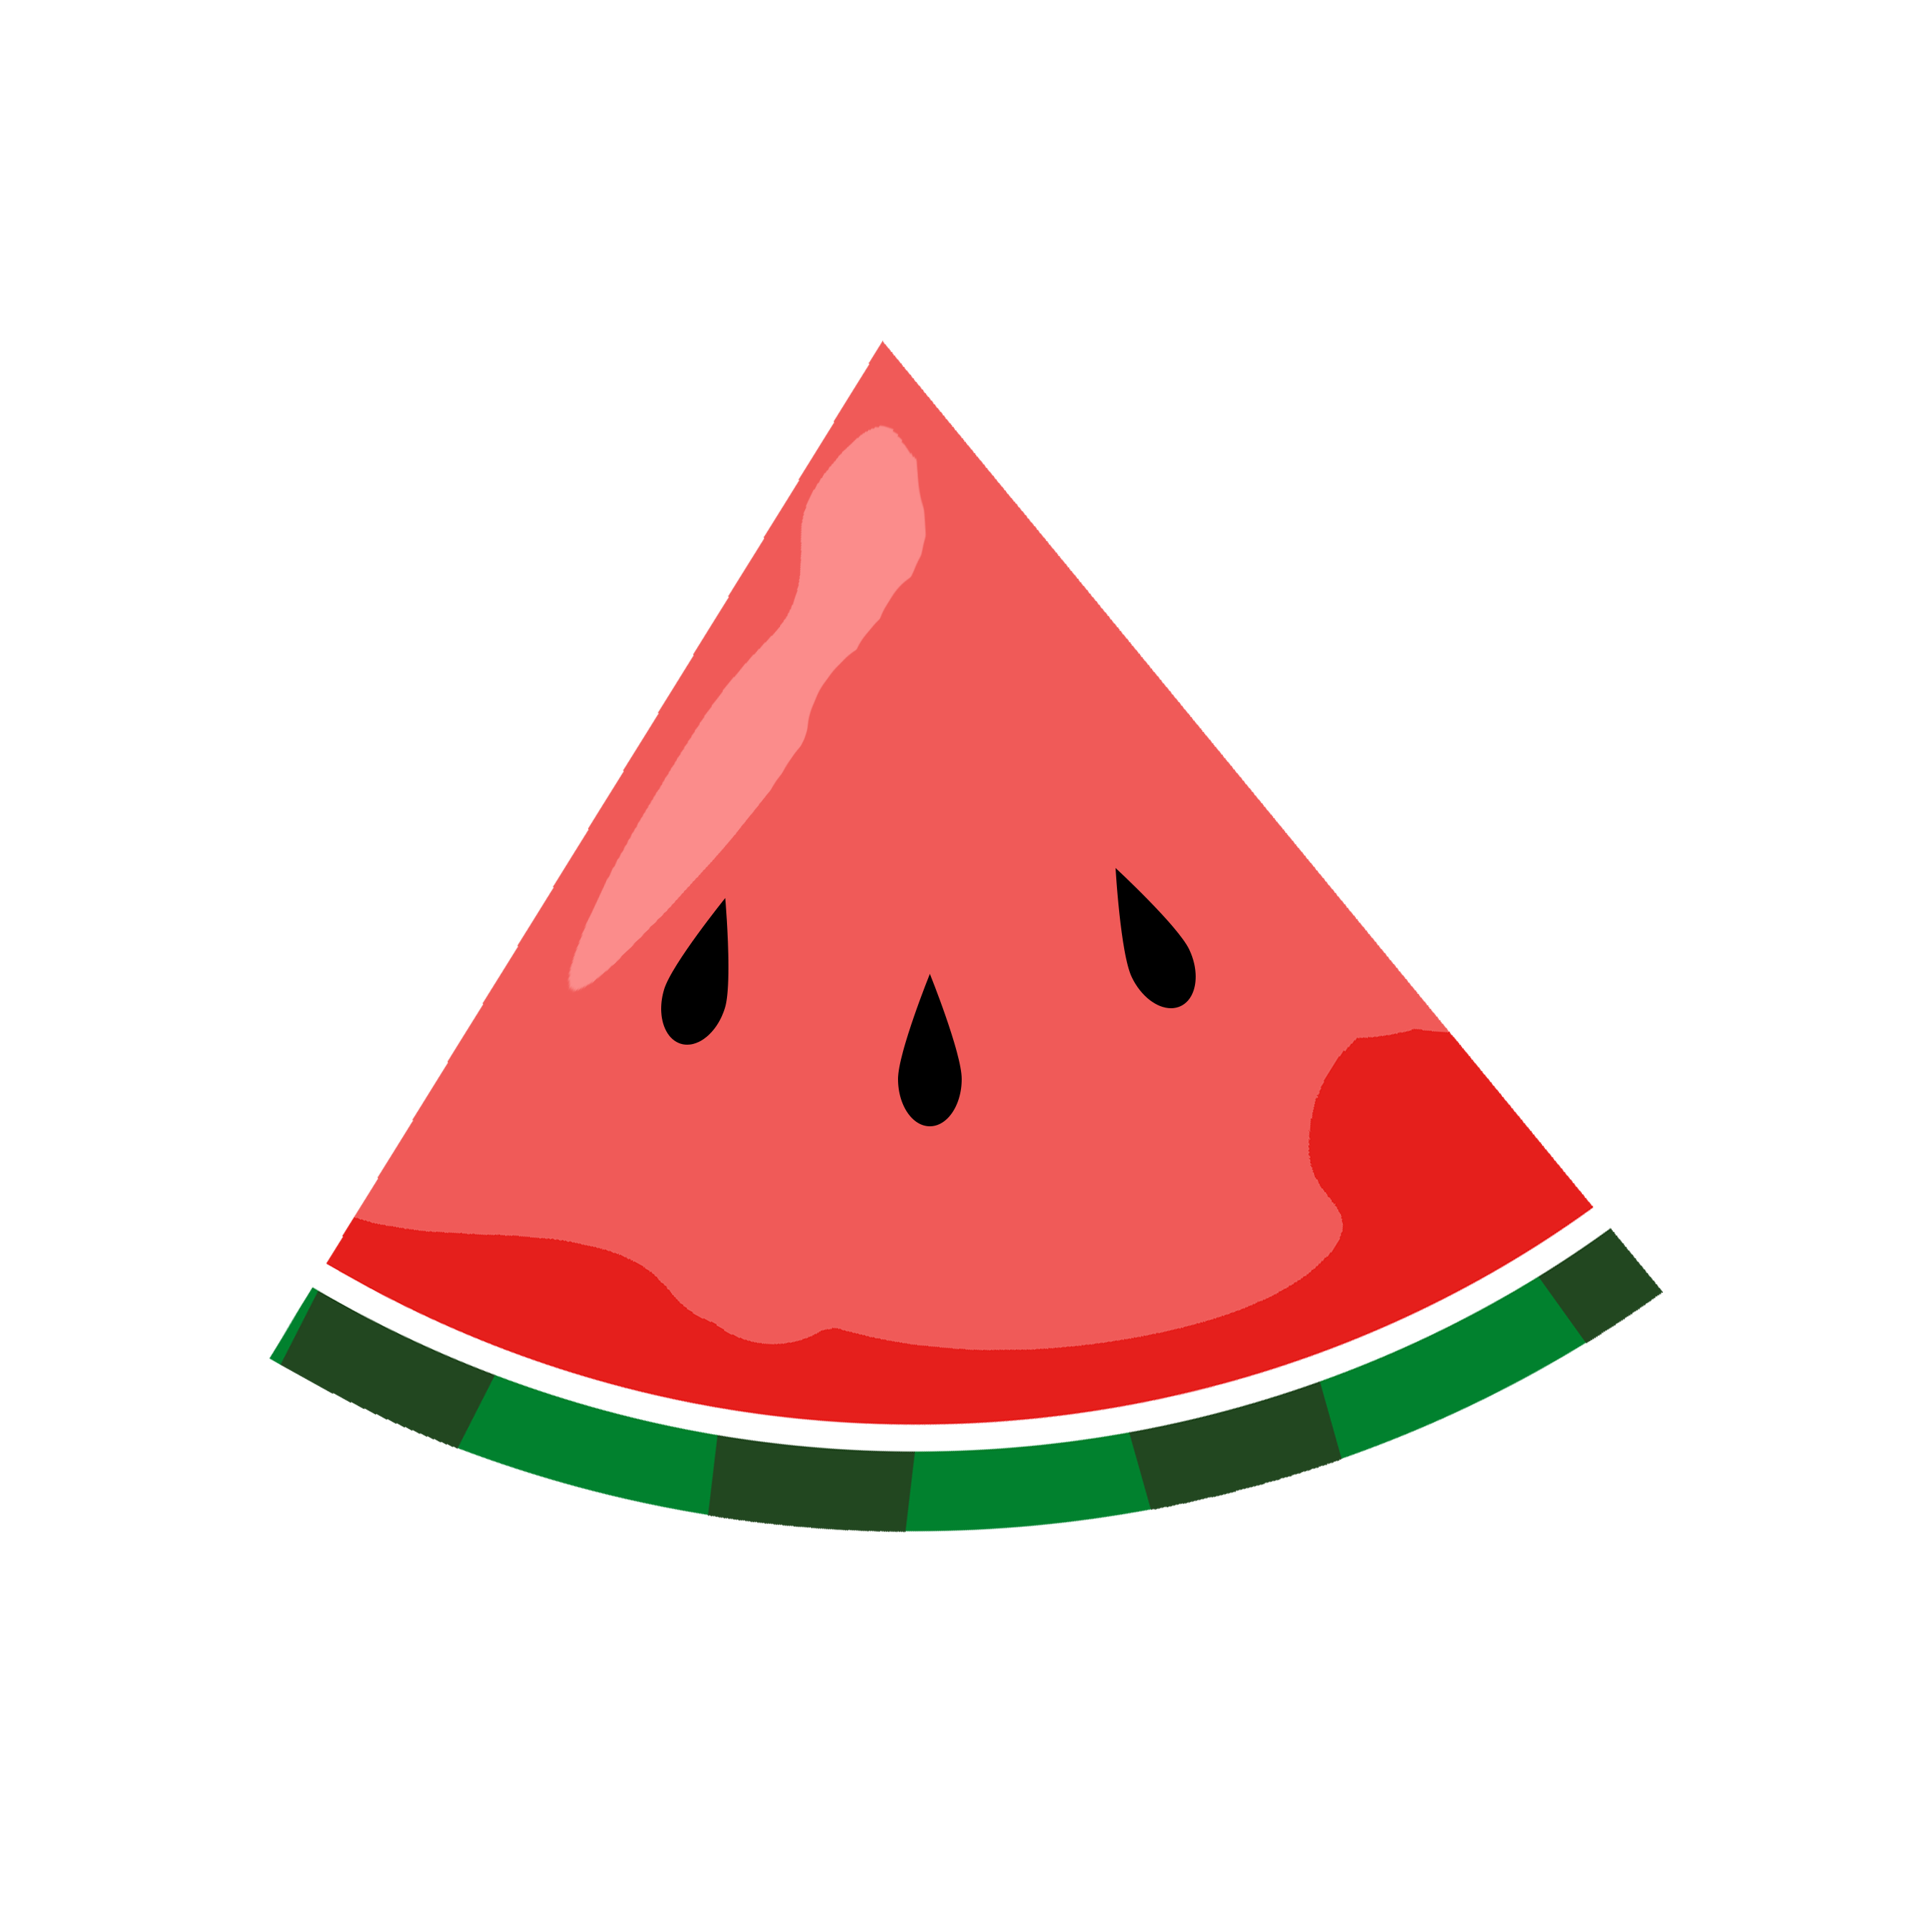 Watermelon images free .